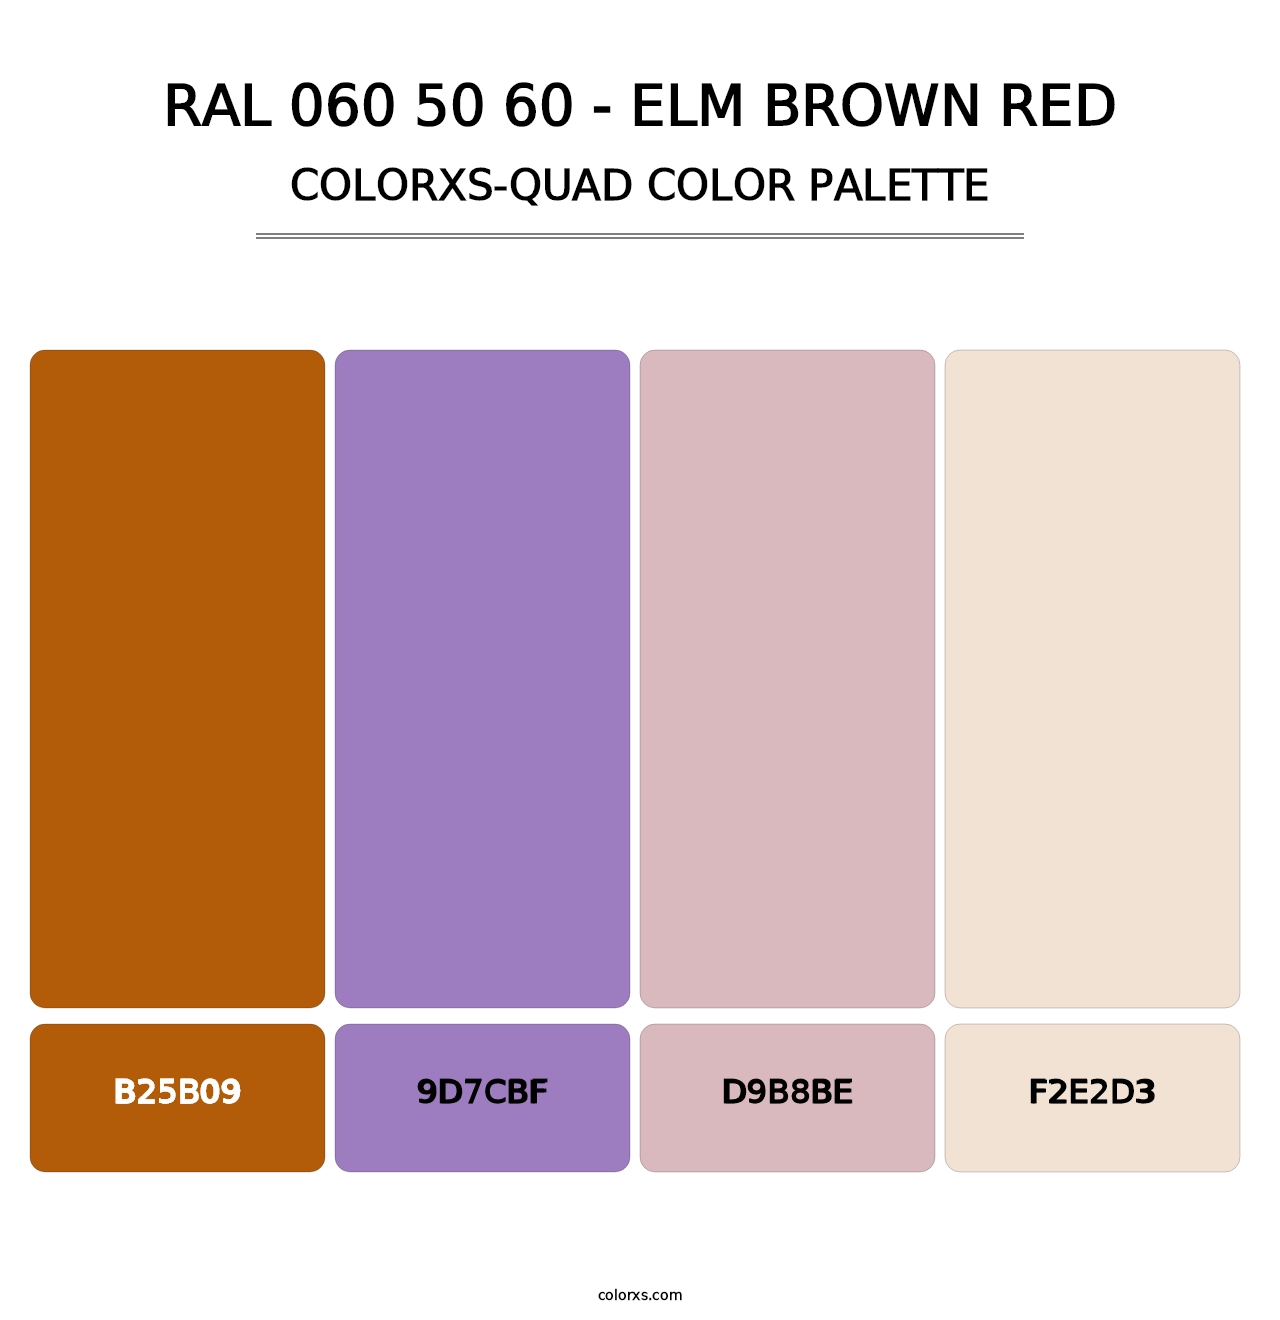 RAL 060 50 60 - Elm Brown Red - Colorxs Quad Palette